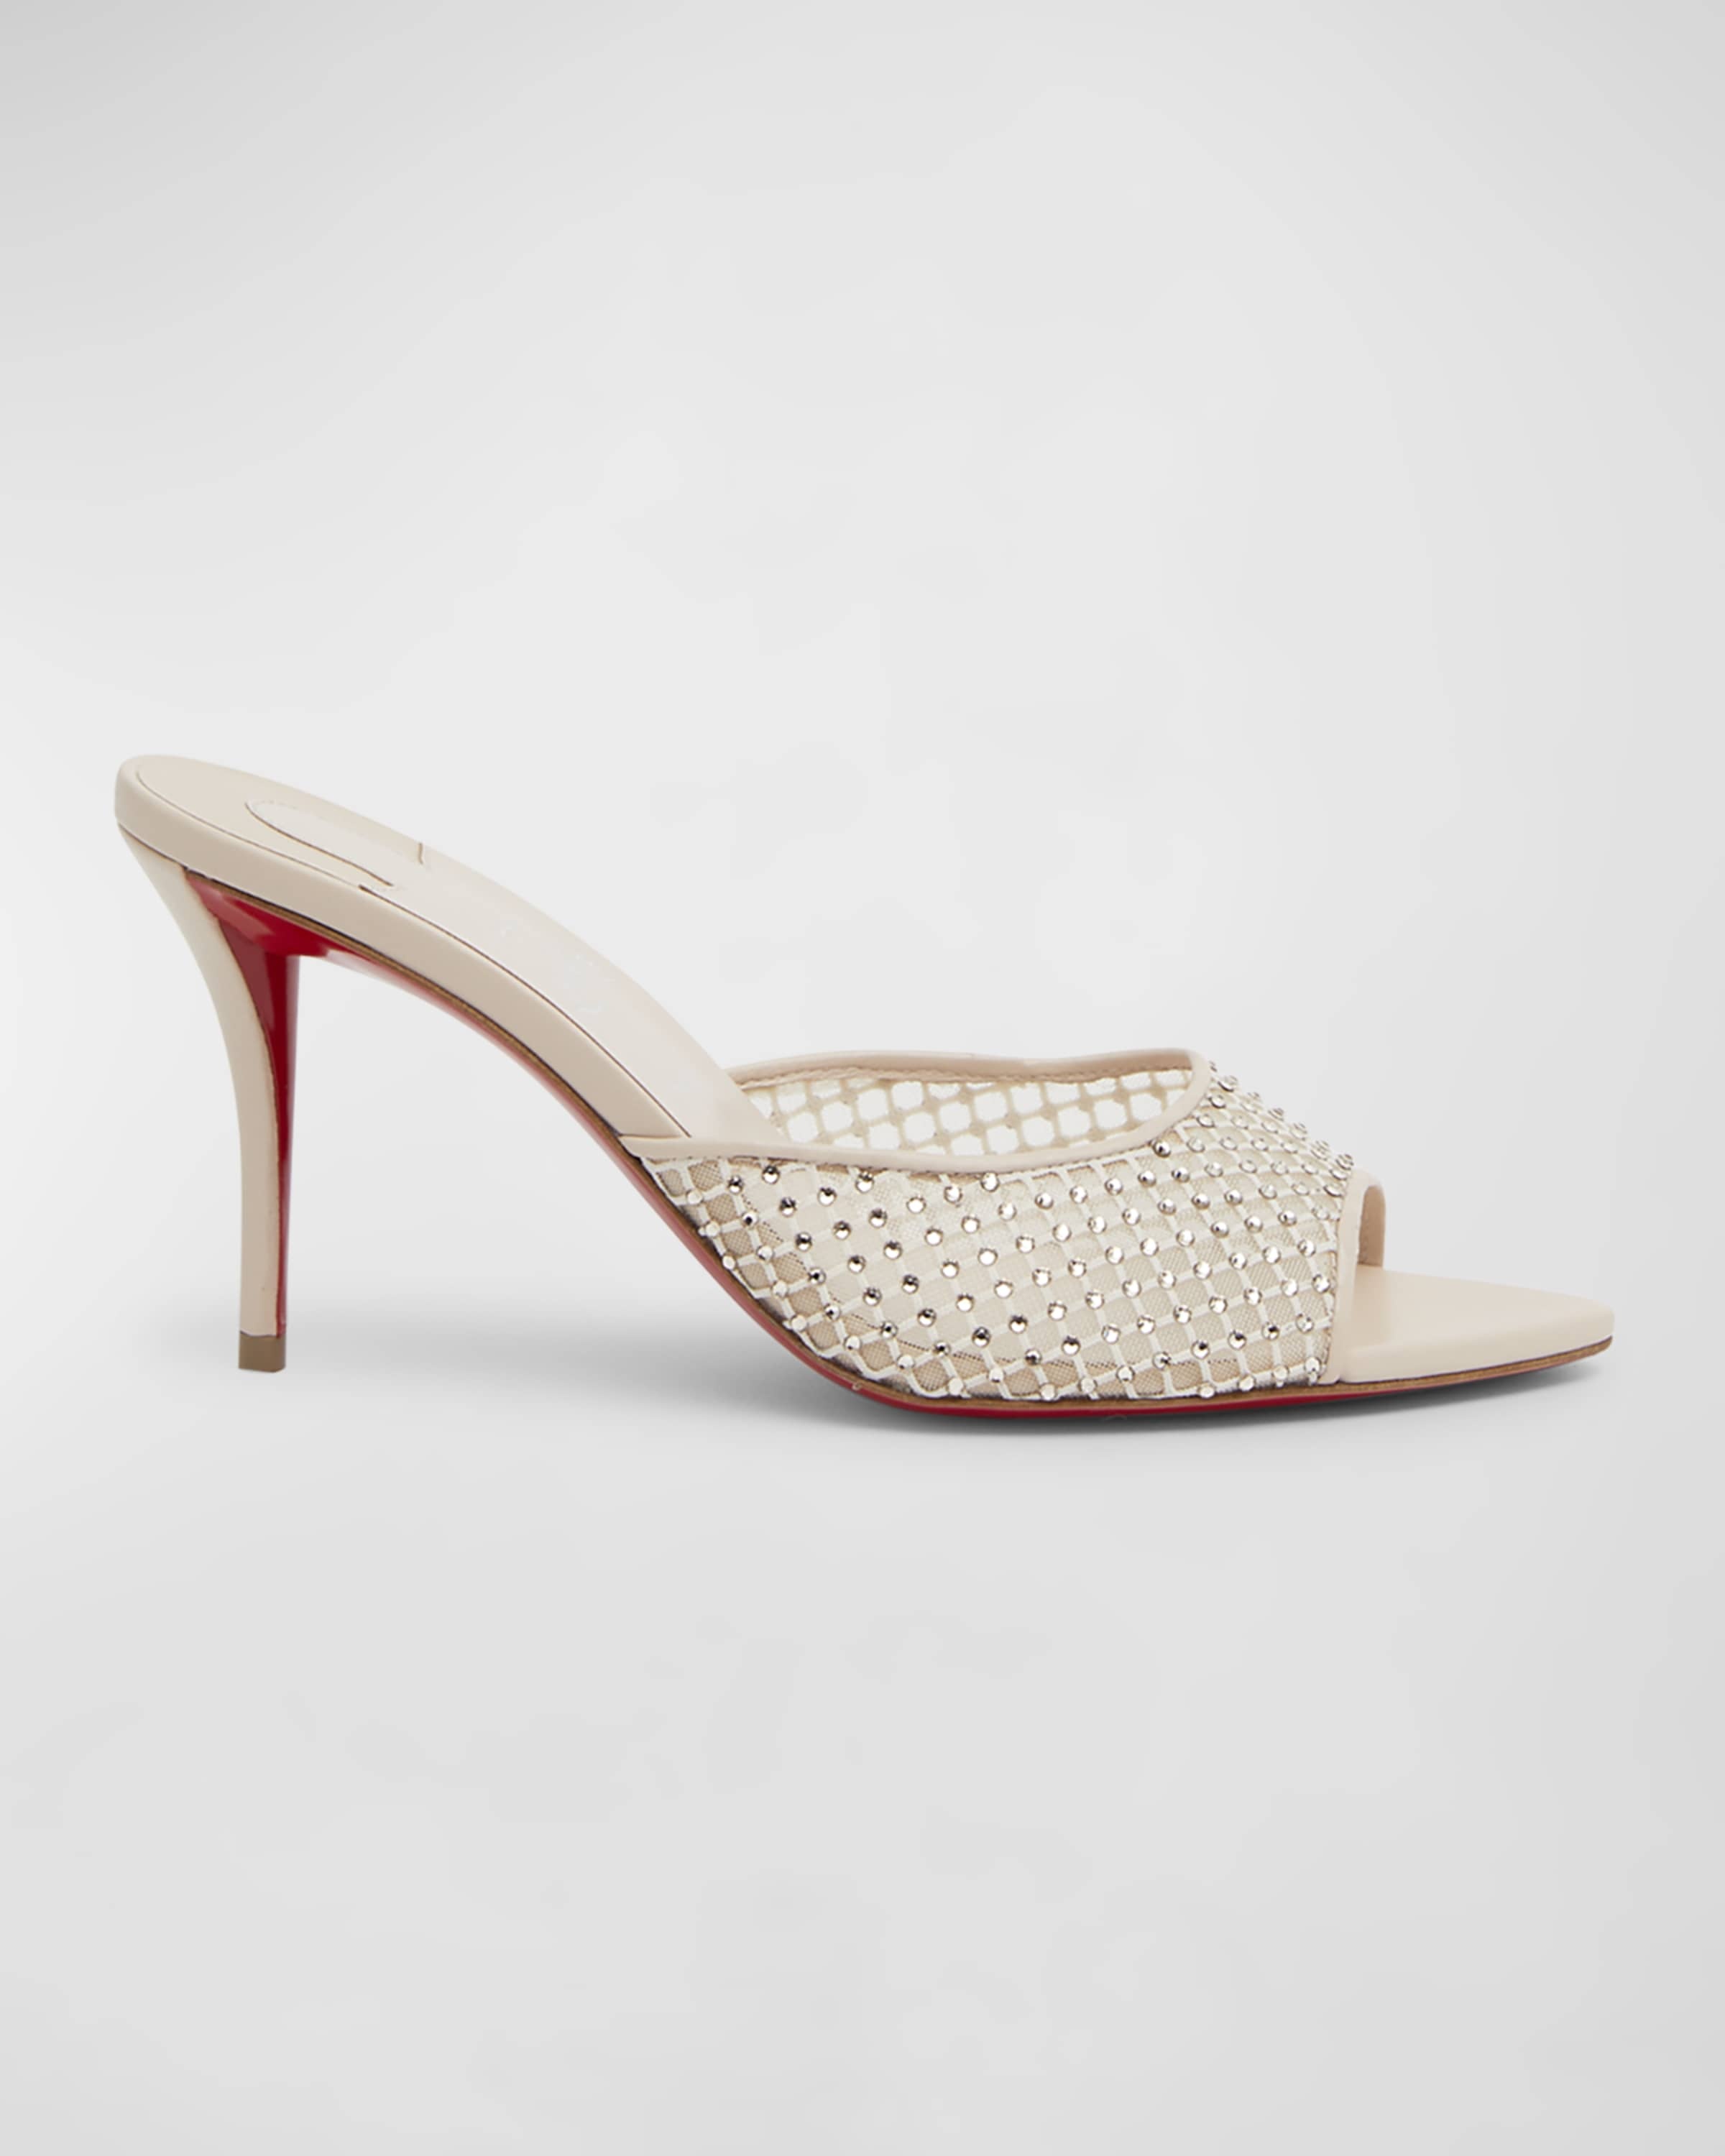 Apostropha Strass Net Red Sole Mule Sandals - 1